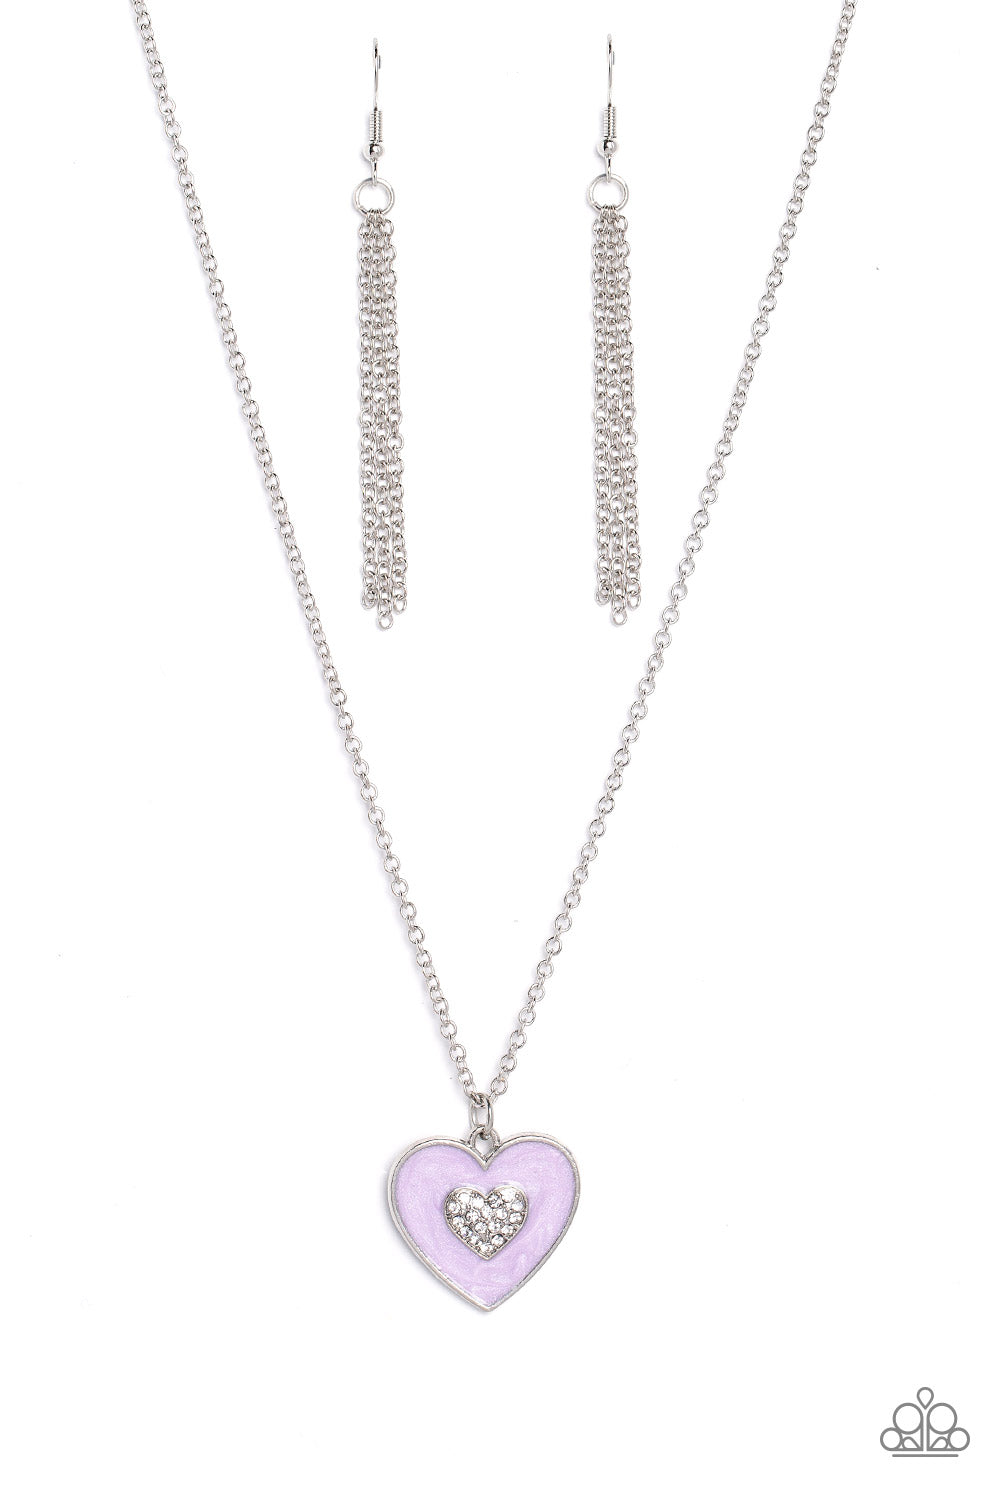 Paparazzi Necklaces - So This Is Love - Purple